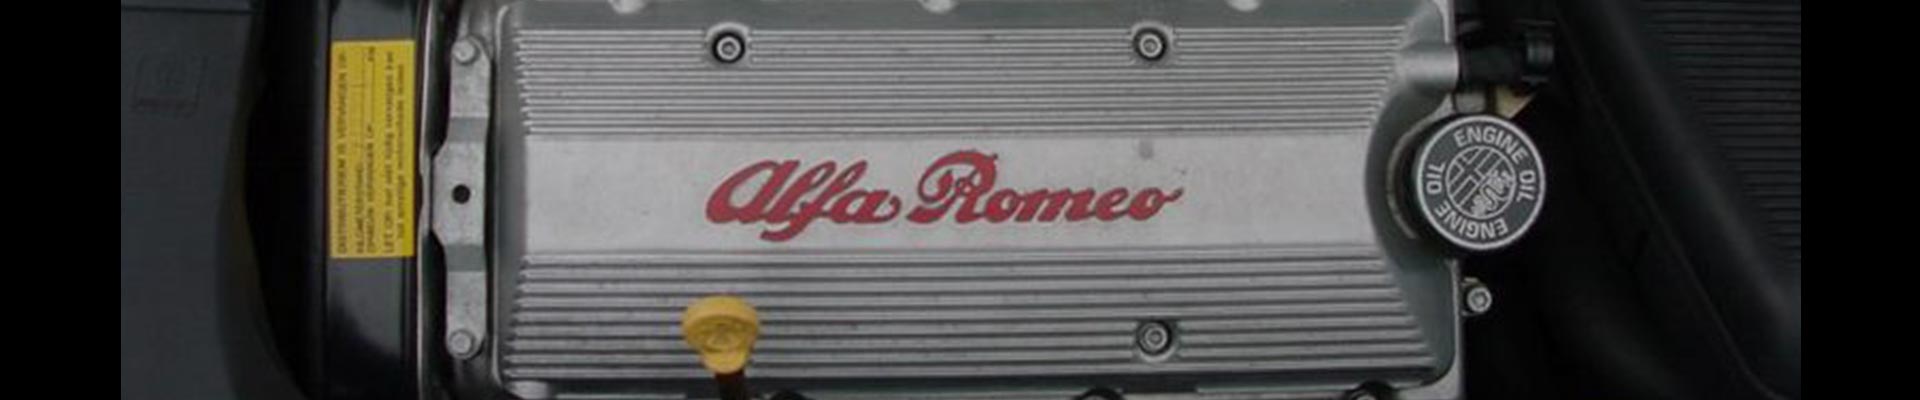 Shop Replacement 1991 Alfa Romeo Spider Parts with Discounted Price on the Net